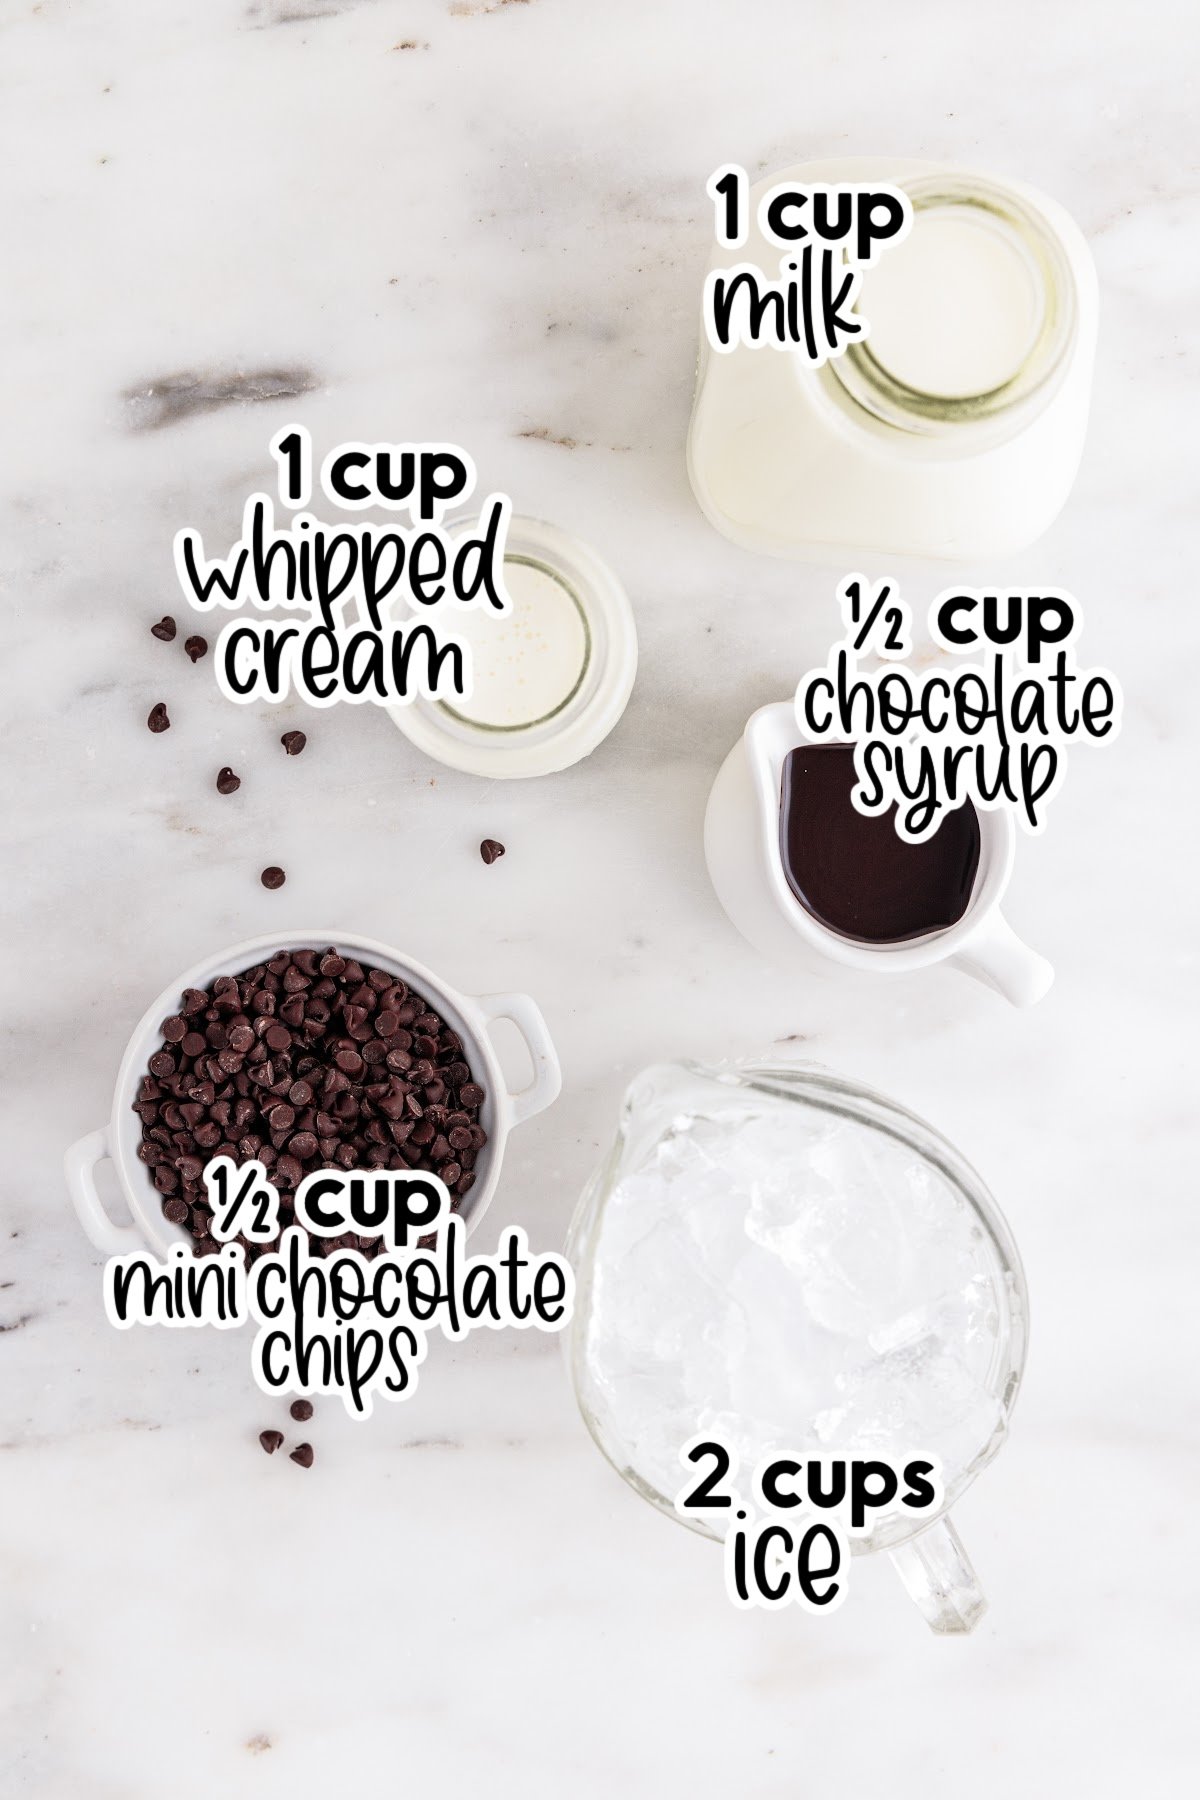 Individual ingredients for a homemade Starbucks double chocolate chip frappuccino set out with text and amount labels.